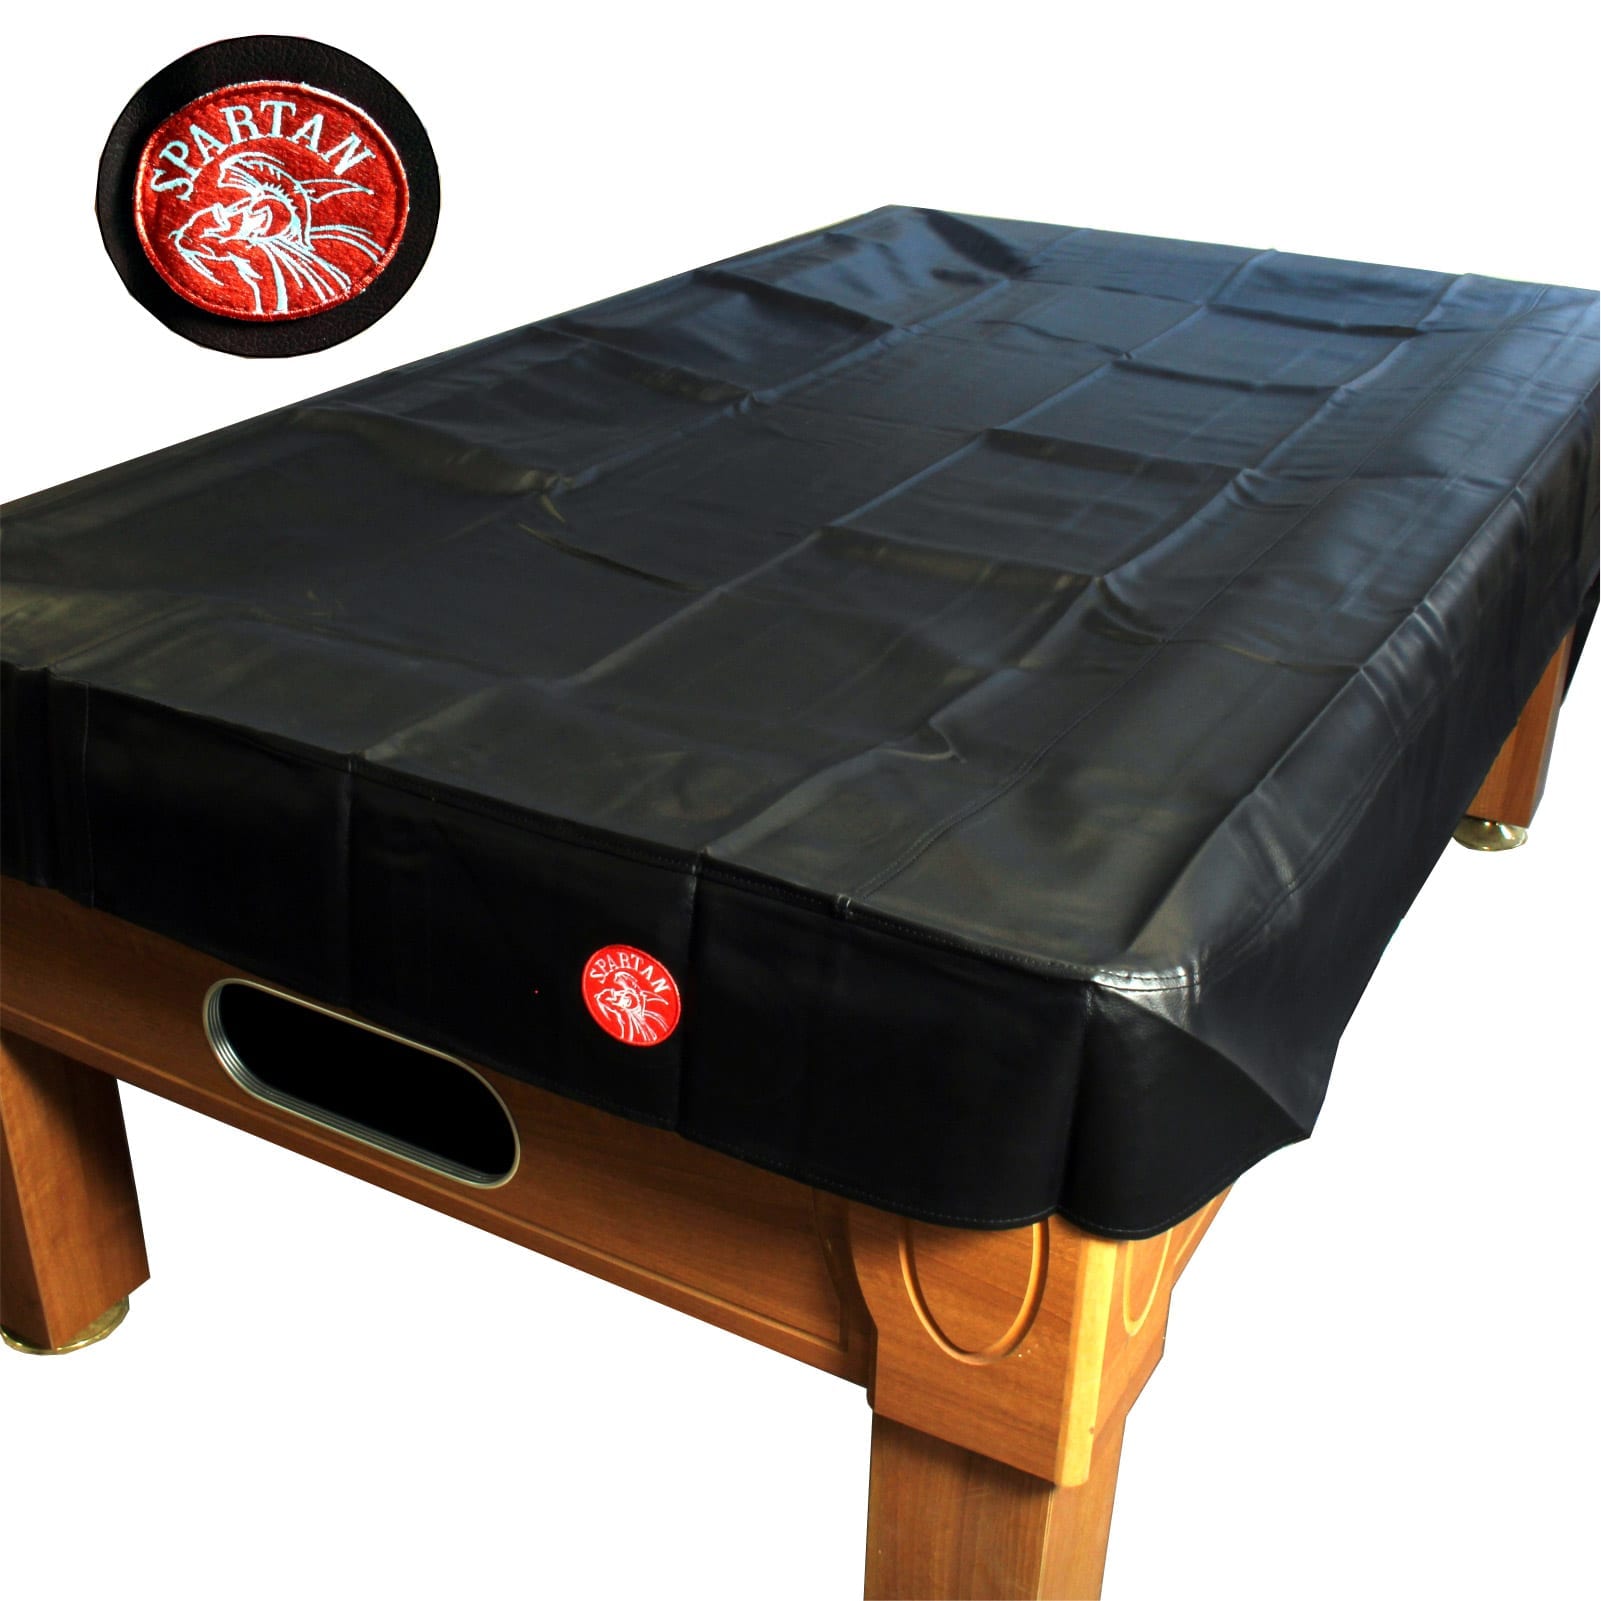 SPARTAN Heavy Duty Water Resistant 9ft American Pool Table Cover 9FT BLACK Cue & Case